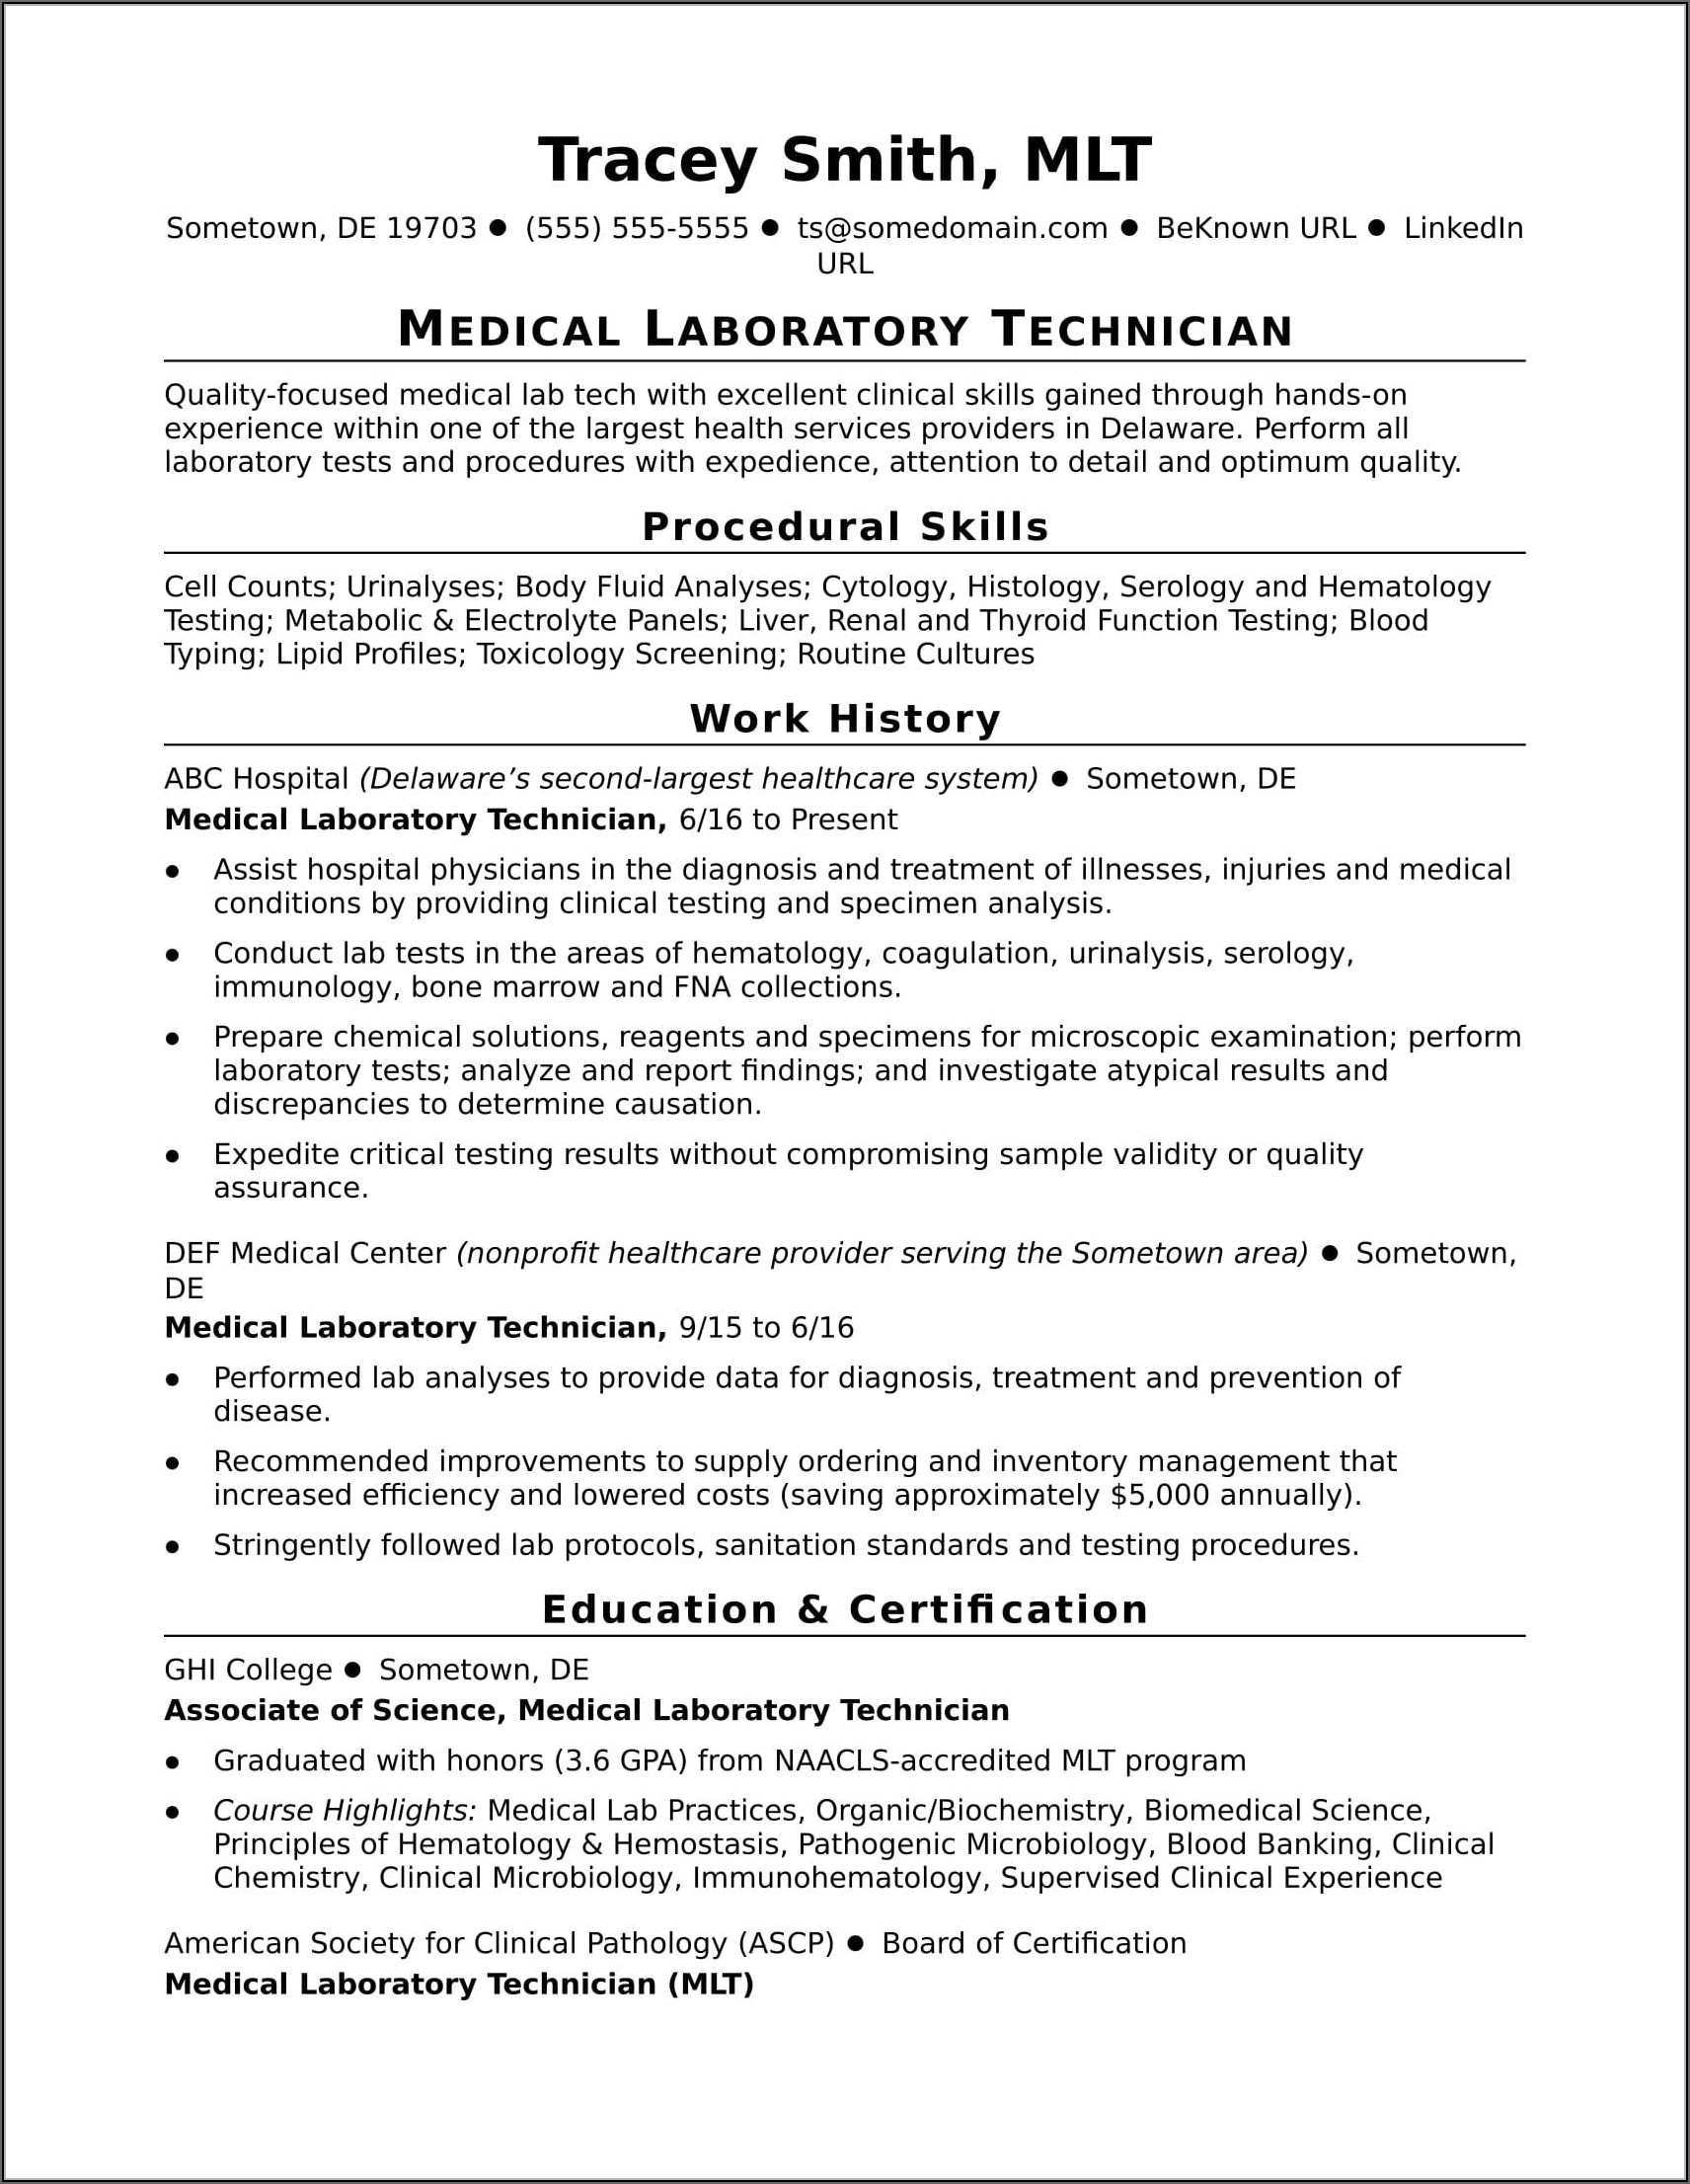 Physician Resume Template Microsoft Word